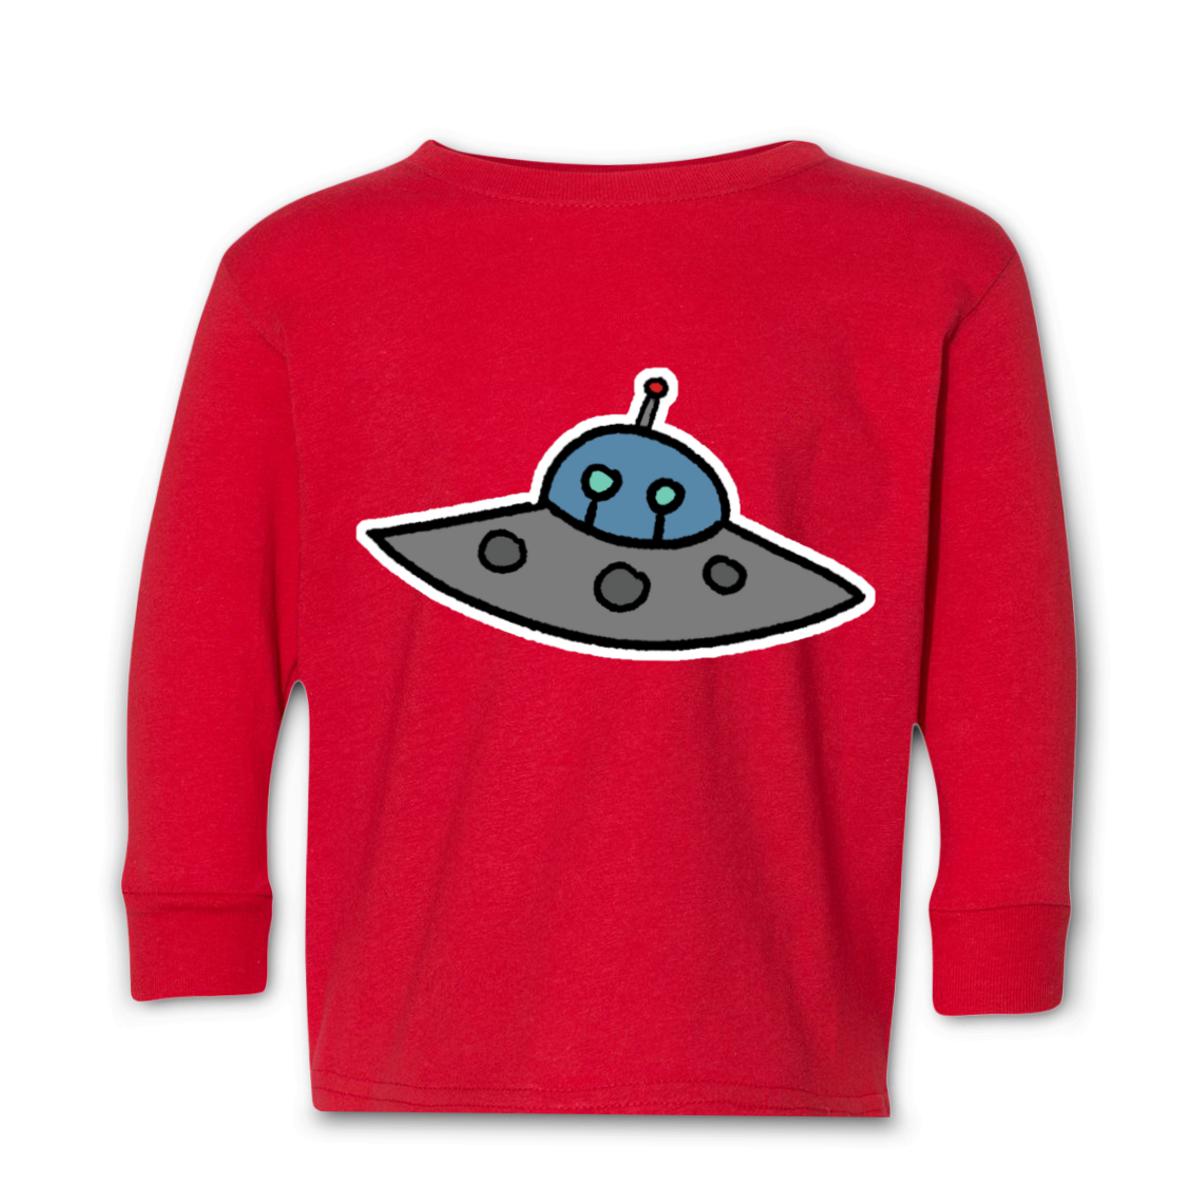 Flying Saucer Toddler Long Sleeve Tee 2T red